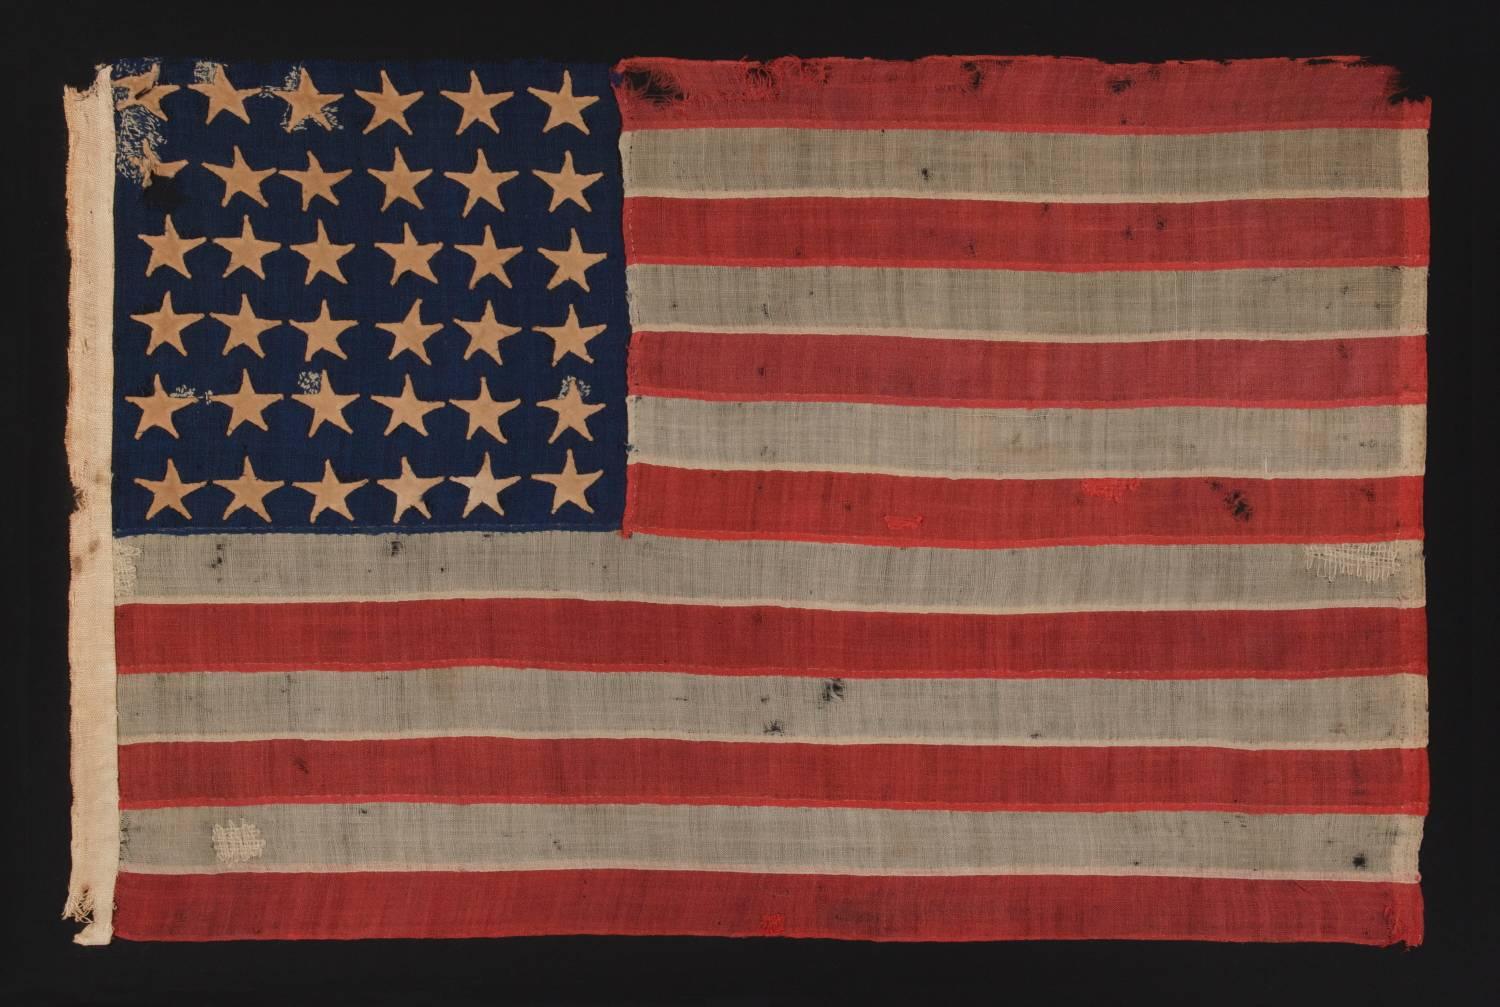 36-stars, Civil War era, made by Annin in New York City, in an unusual tiny size for the period and entirely hand-sewn, probably carried as a military camp colors or guidon, Nevada Statehood, 1864-1867.

Entirely hand-sewn American national flag